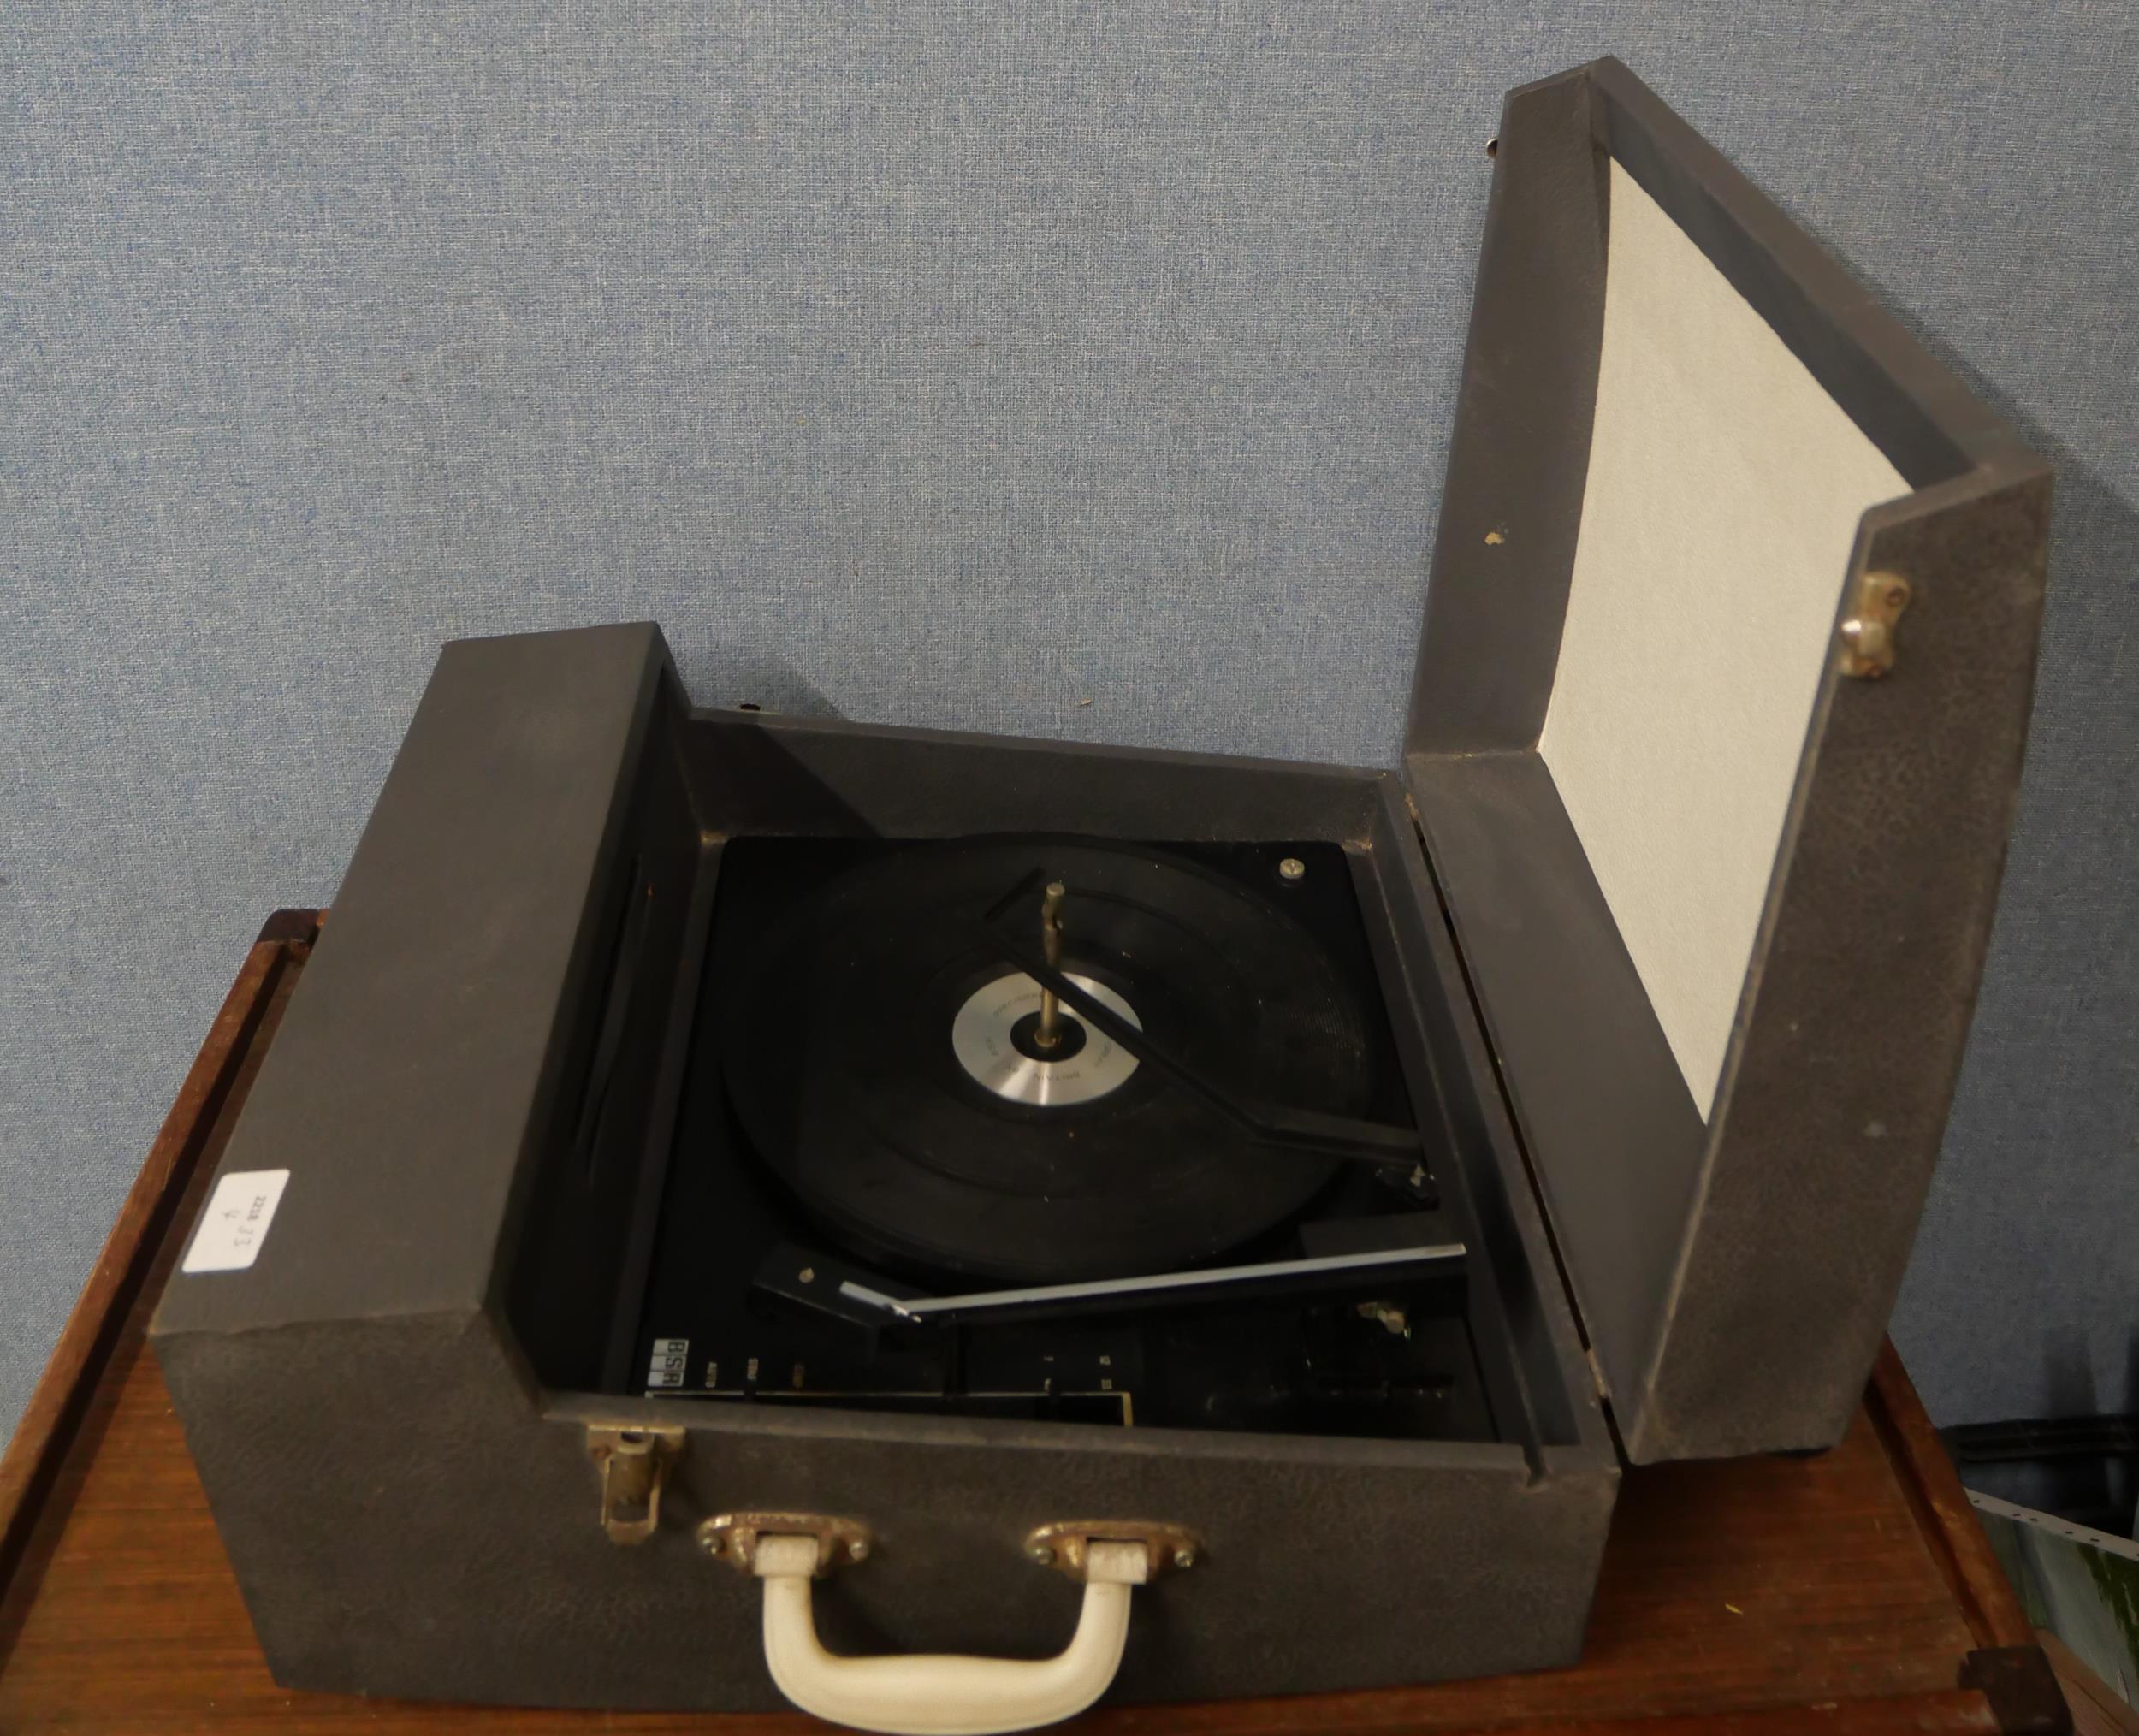 A BSR record player